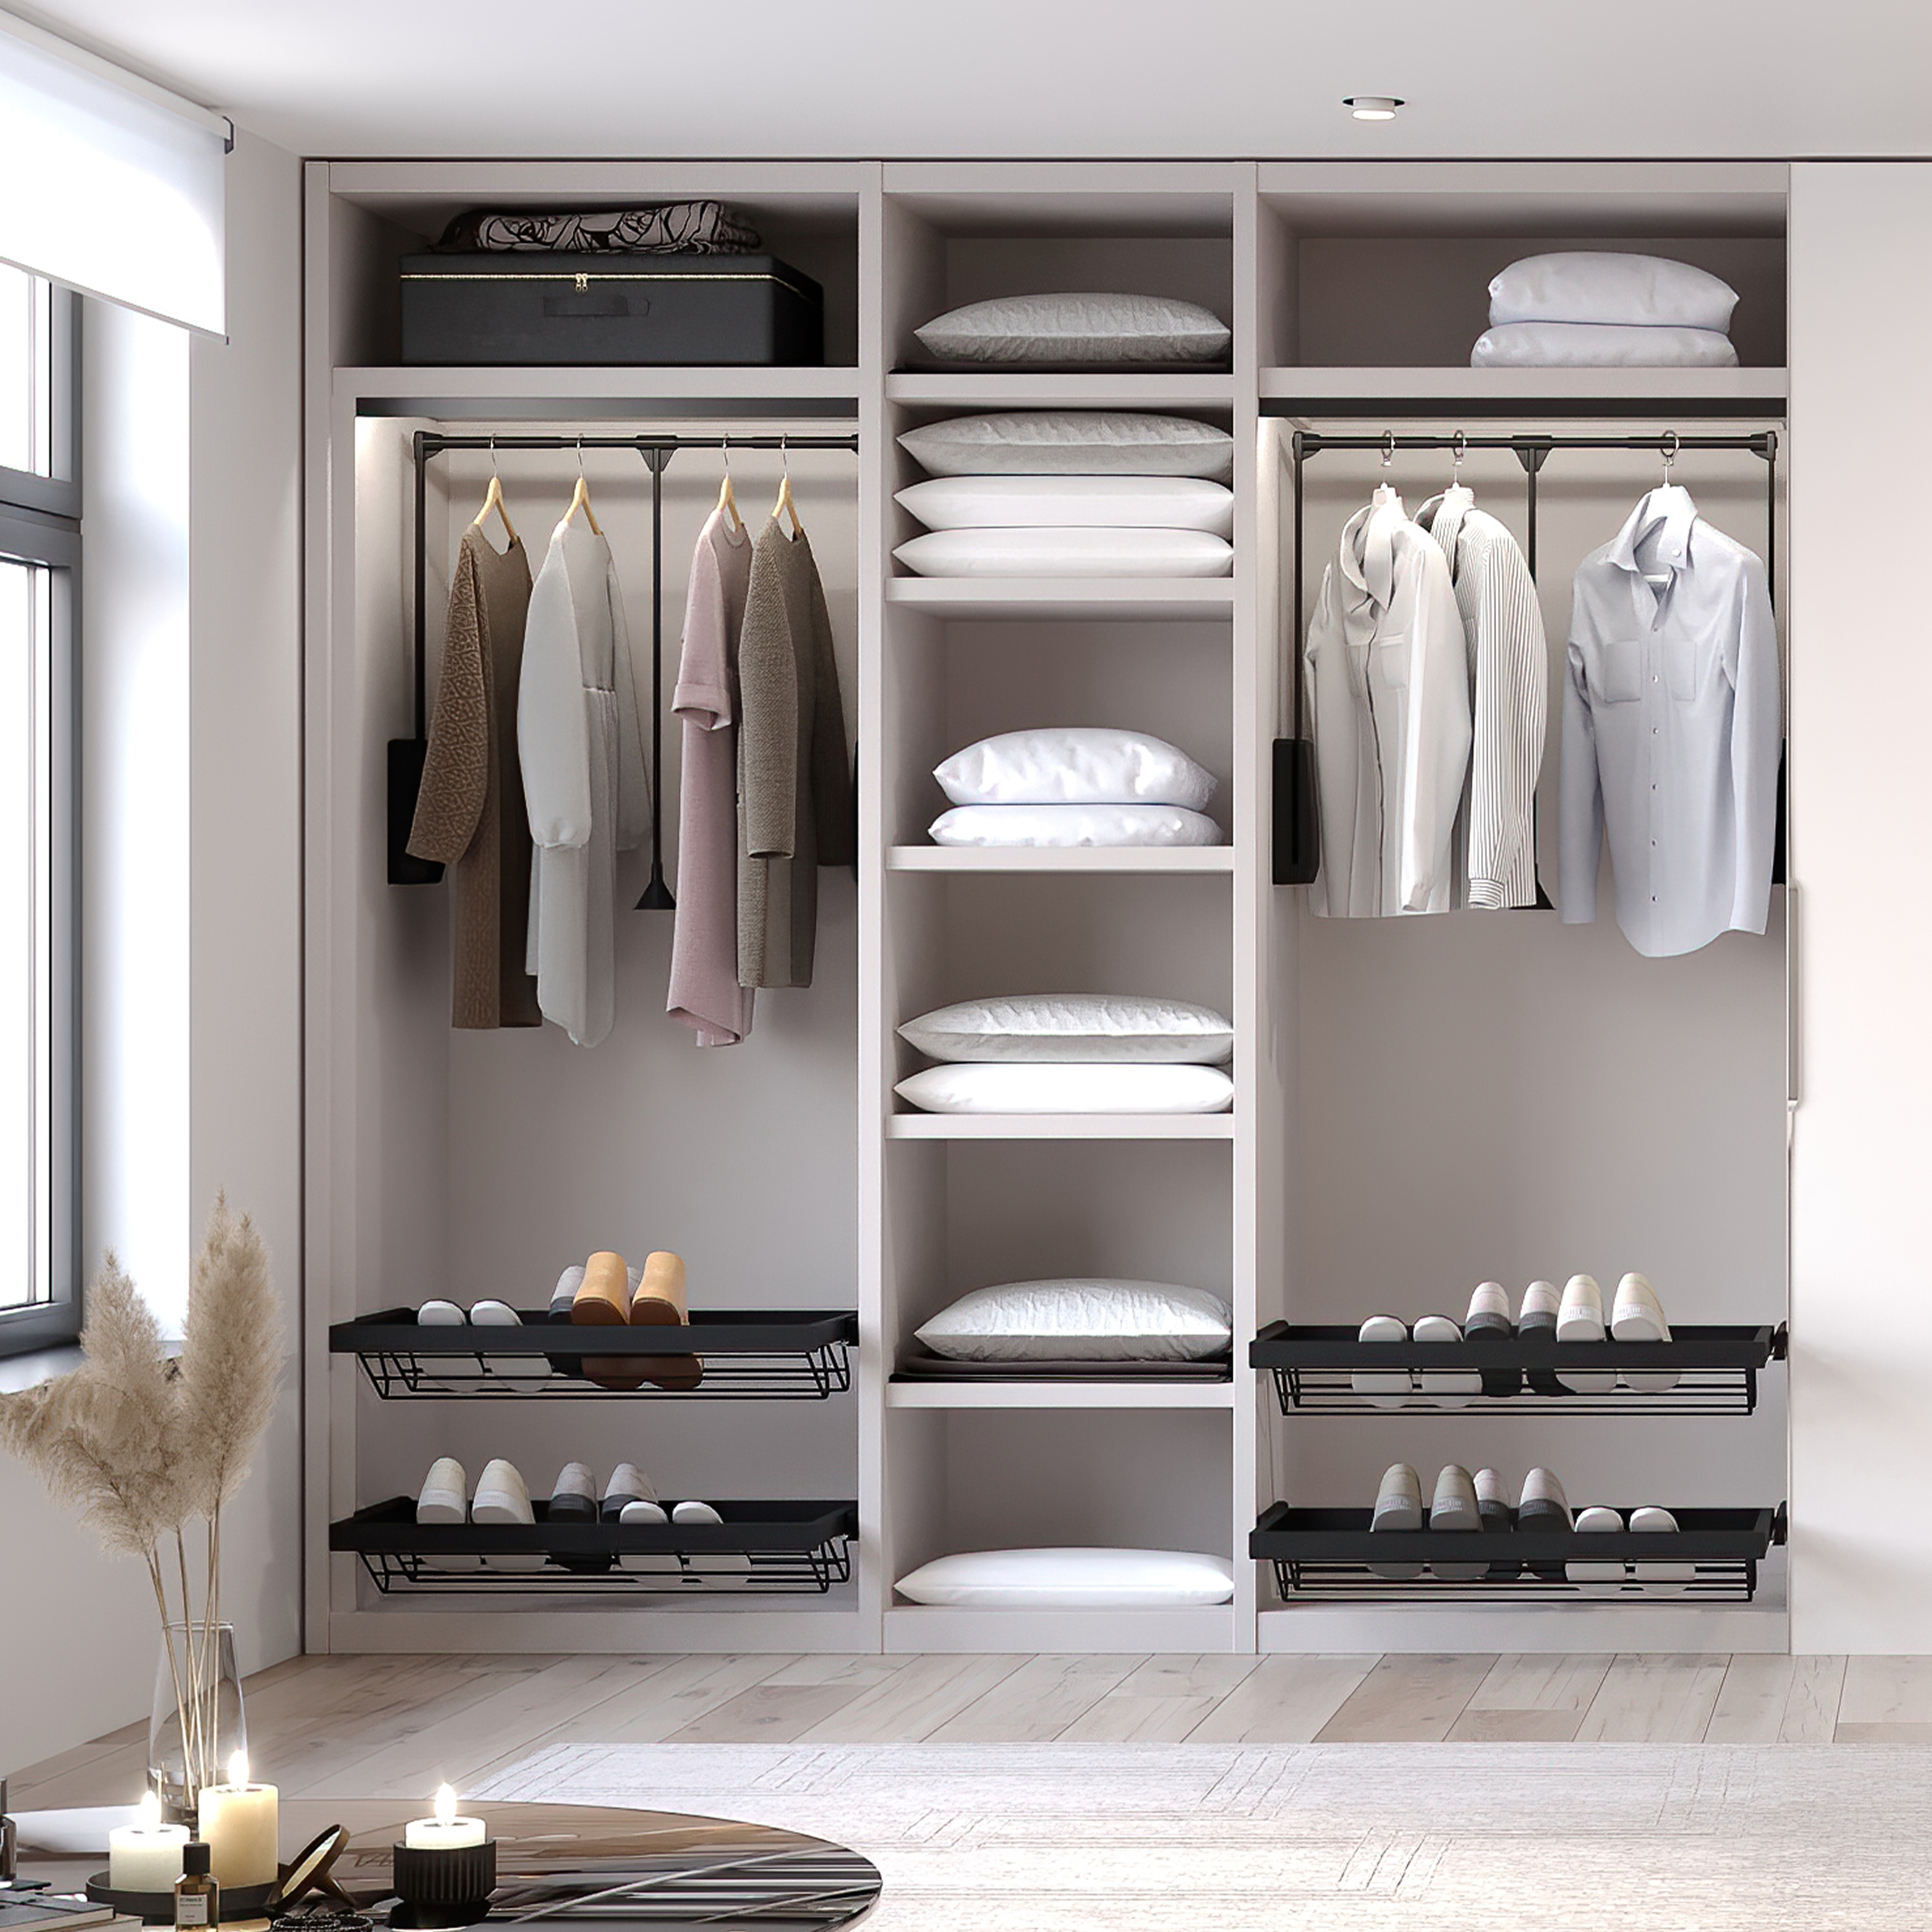 Emuca Pull-Down Wardrobe Lift System 600-830mm  in Chrome. 